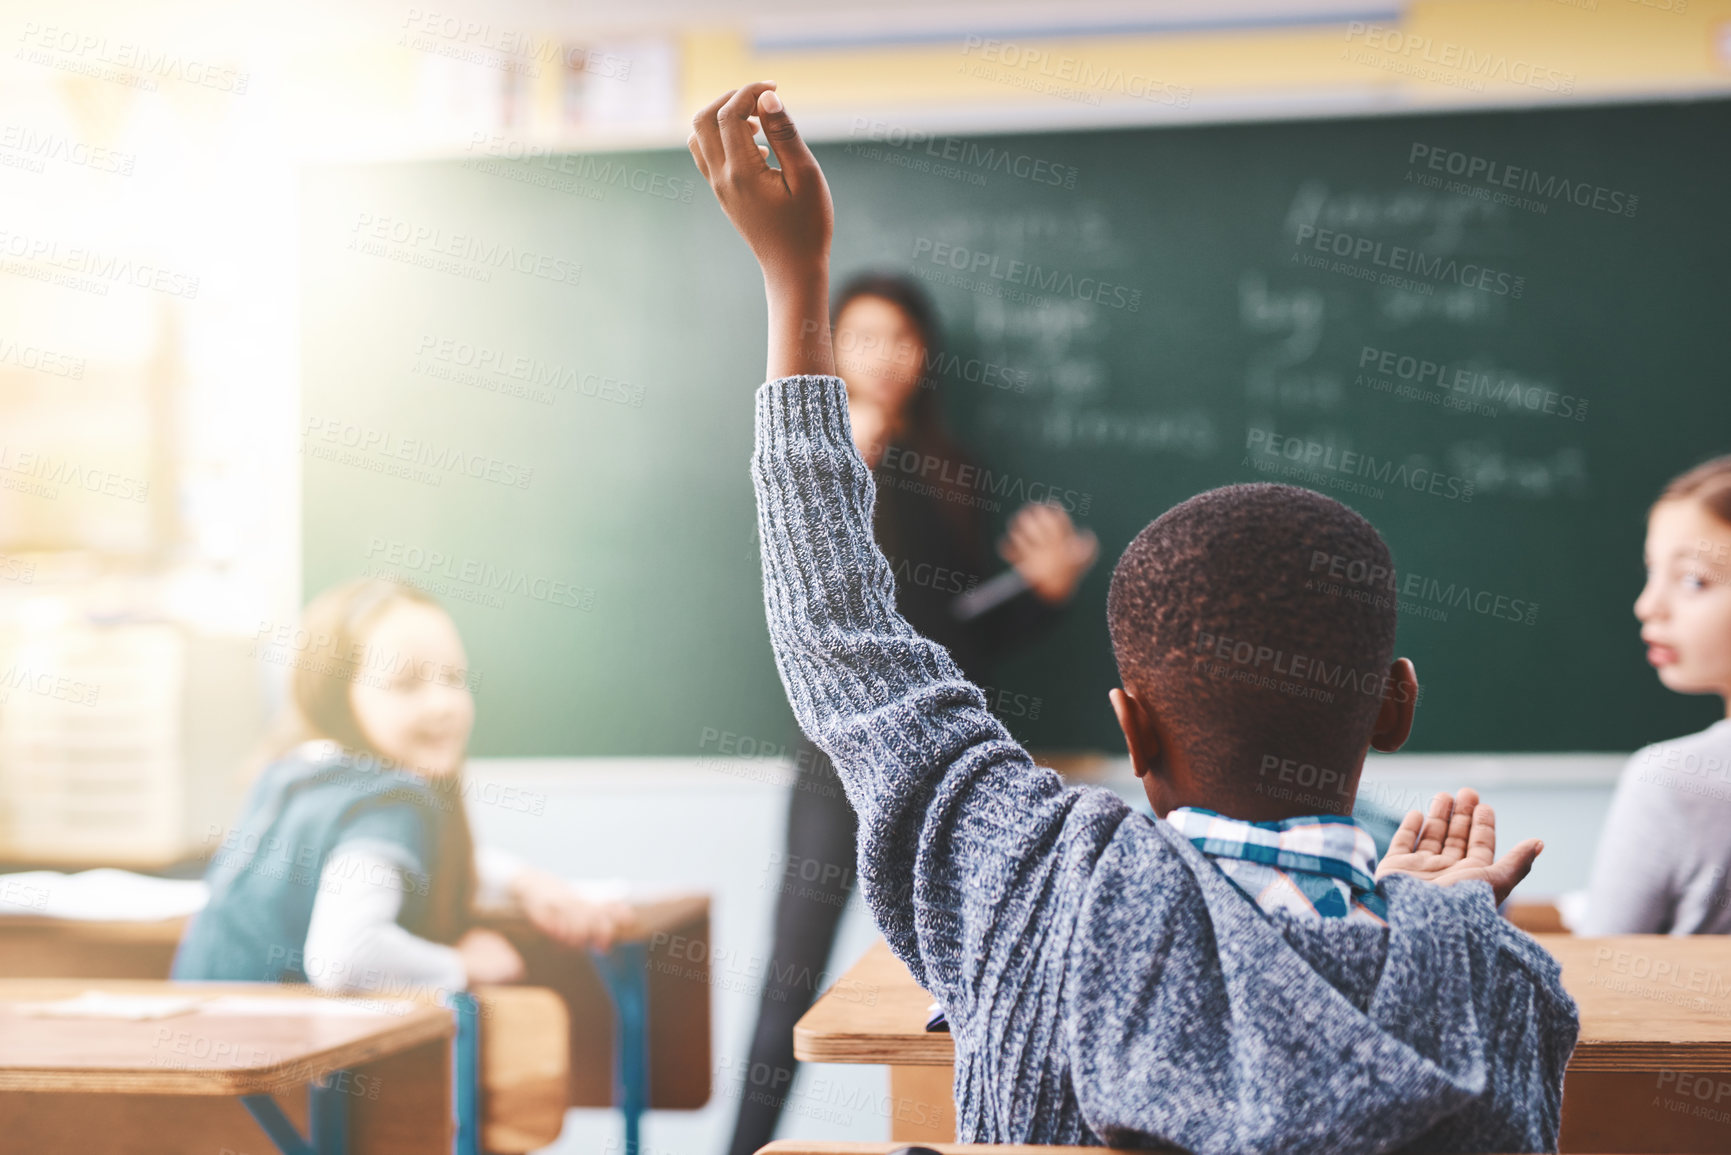 Buy stock photo Cropped shot of elementary school children raising their hands to ask questions in the class